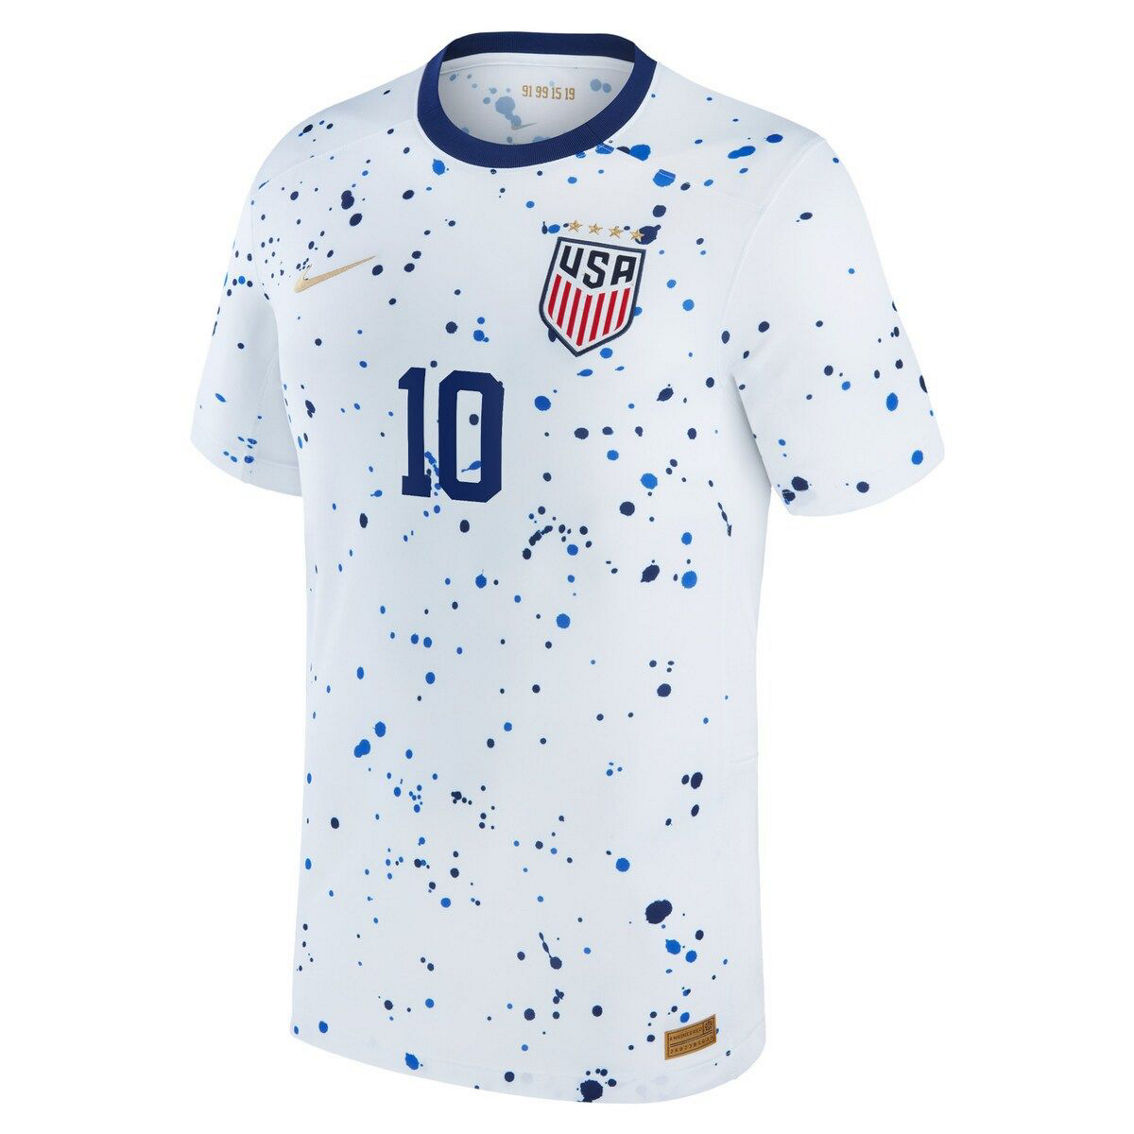 Nike Men's Lindsey Horan White USWNT 2023 Home Replica Jersey - Image 3 of 4